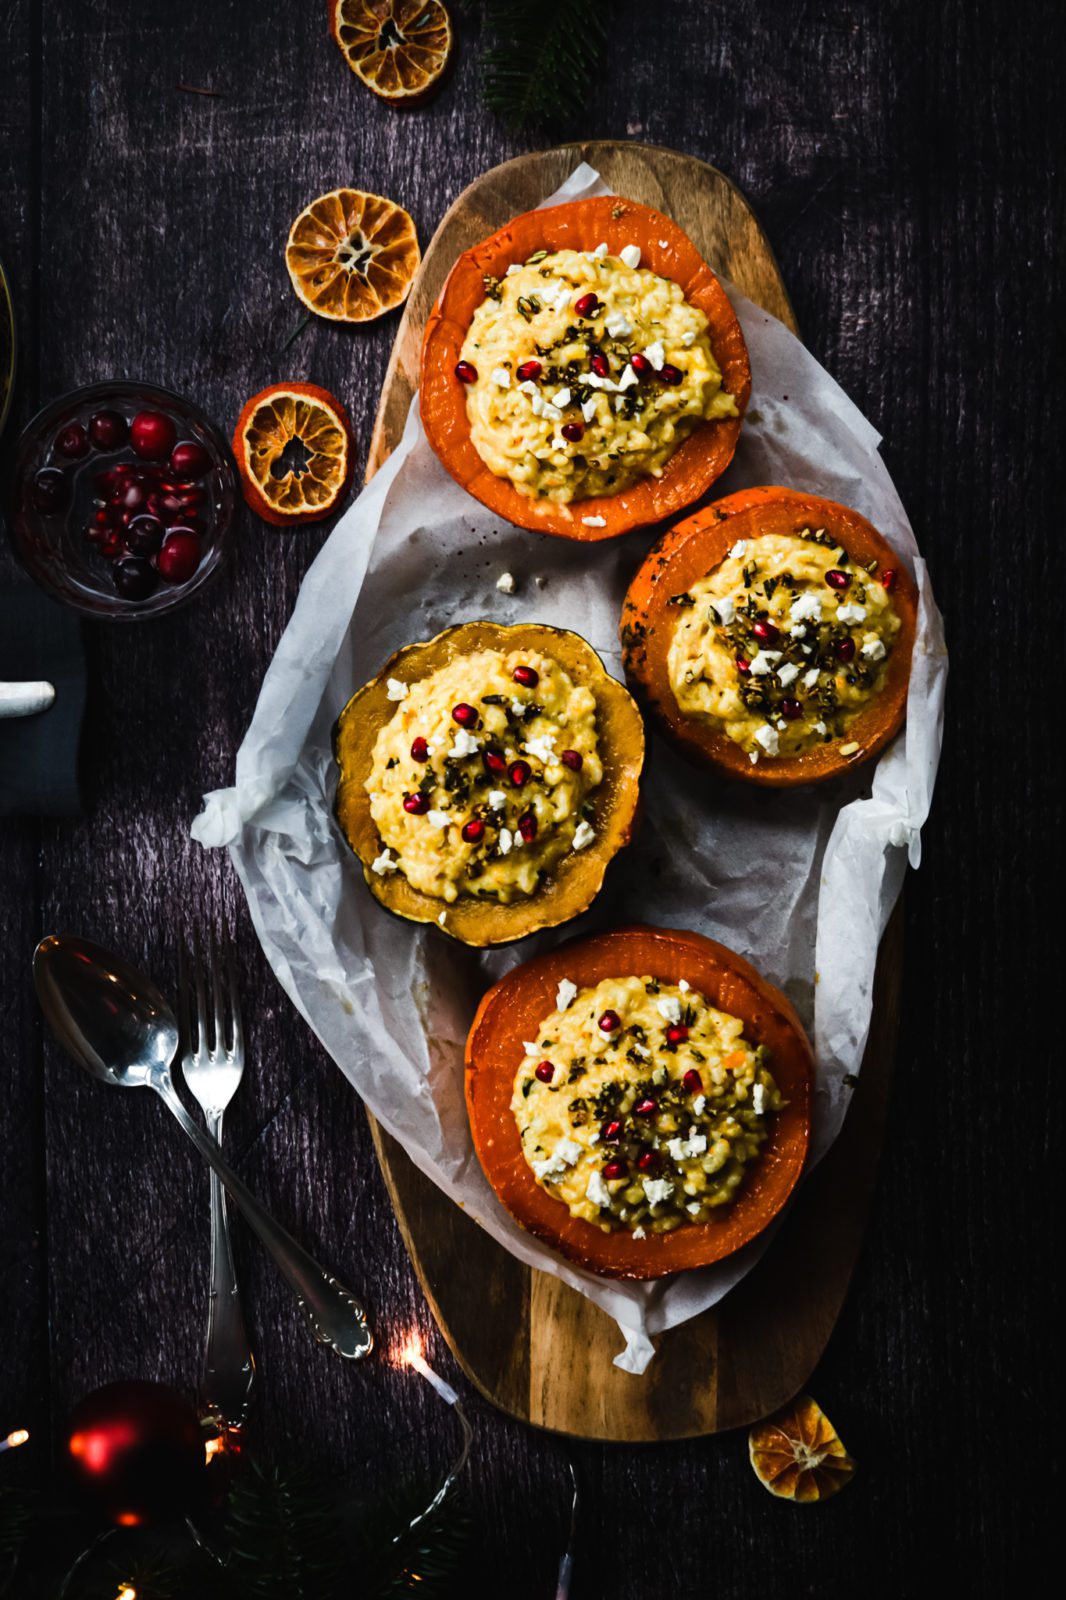 Festive vegetarian pumpkin risotto with pomegranate seeds and feta crumbs